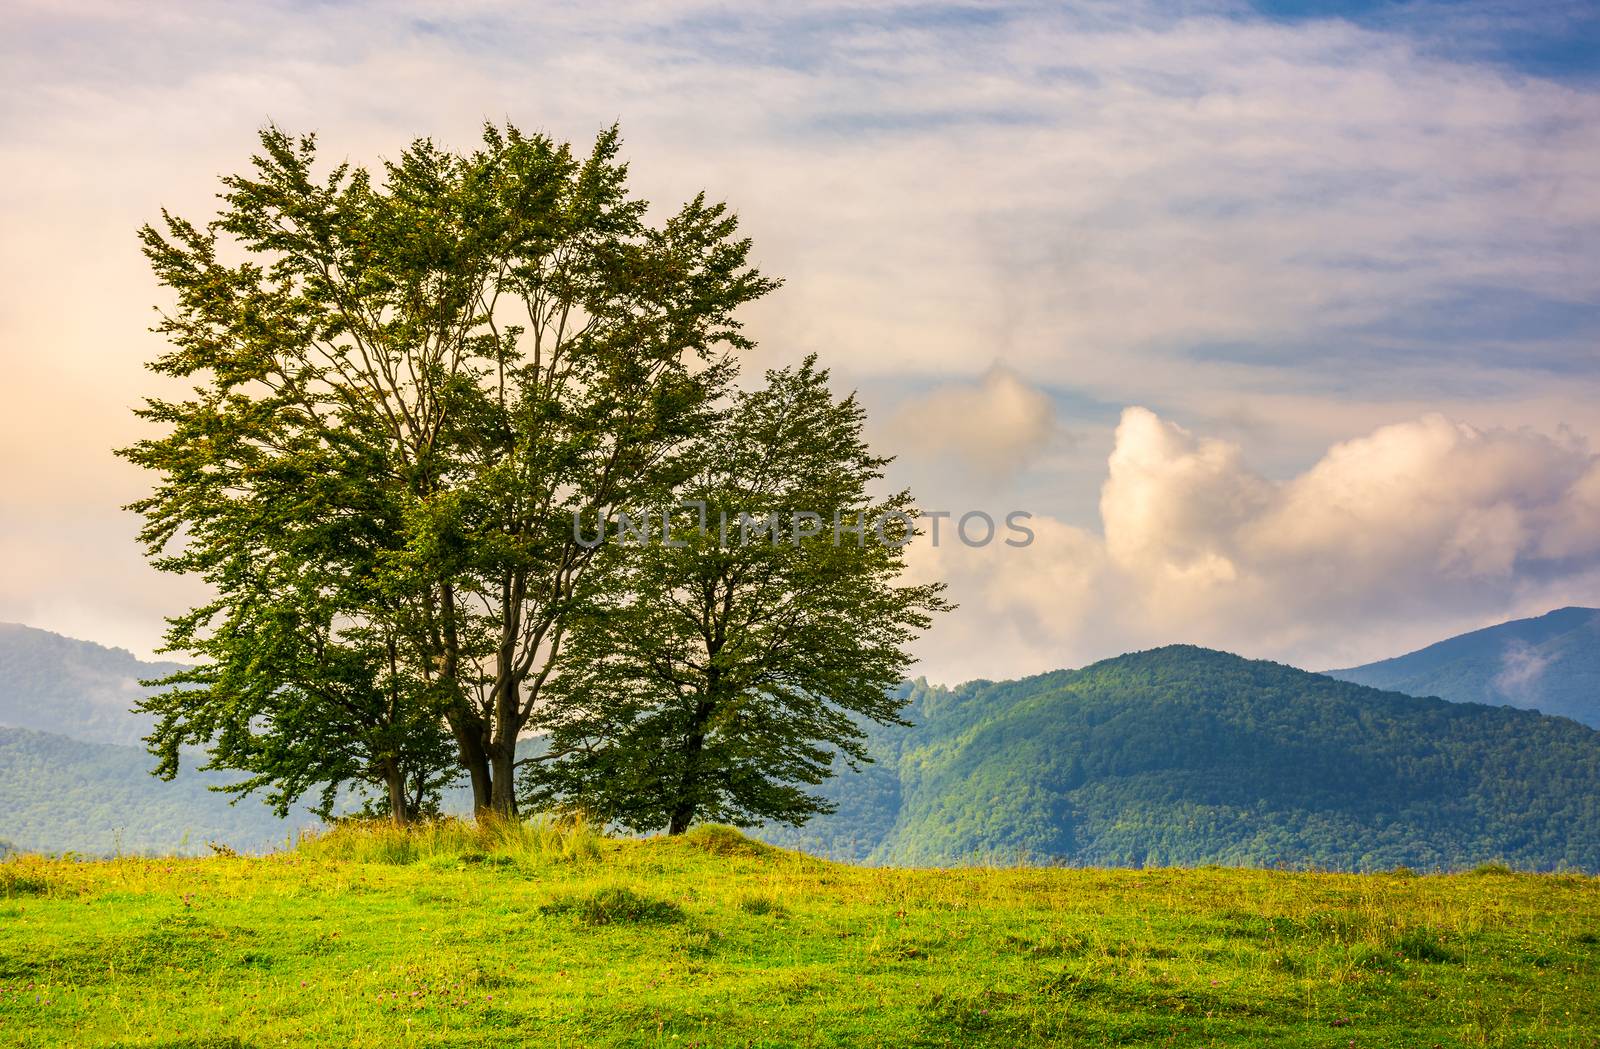 few trees on edge of a grassy hillside at sunrise with gorgeous sky. lovely autumnal scenery in mountains